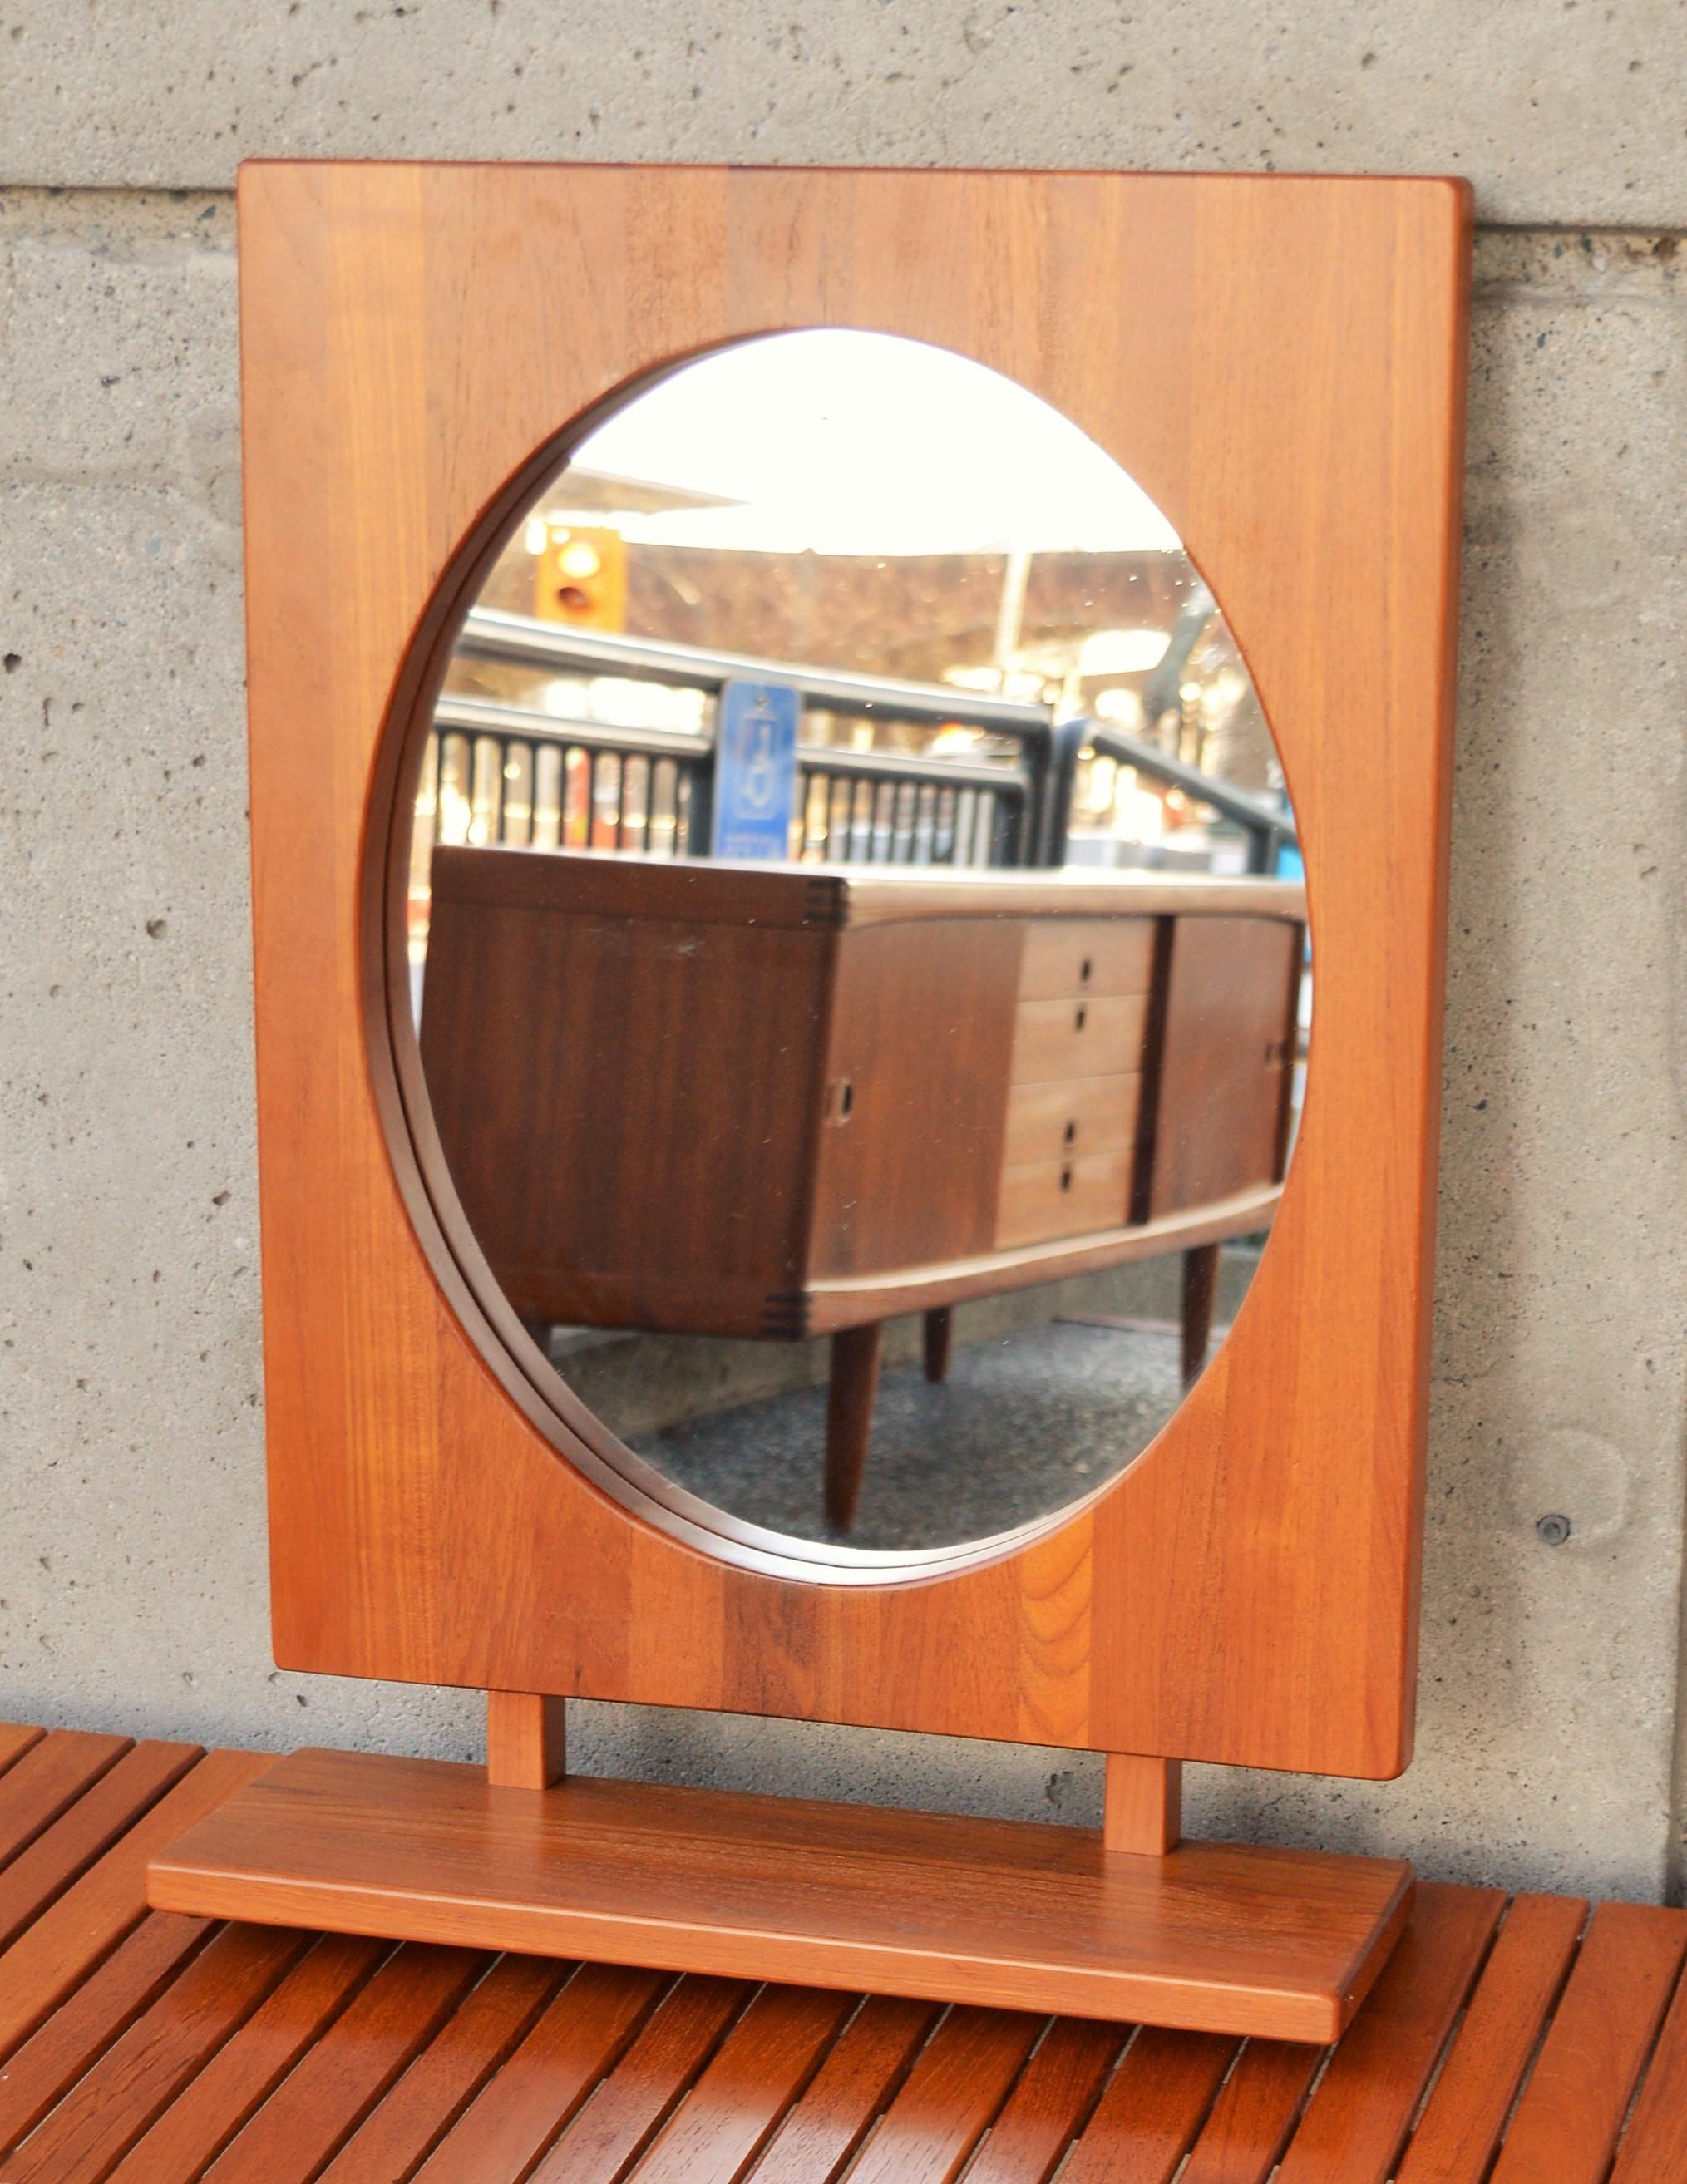 This exquisite table or wall mirror is made entirely of solid teak, and features an oval mirror. Designed by Pedersen & Hansen, Denmark, in the 1960s. In excellent condition and freshly oiled, with no scratches or nicks or damage to the mirror.